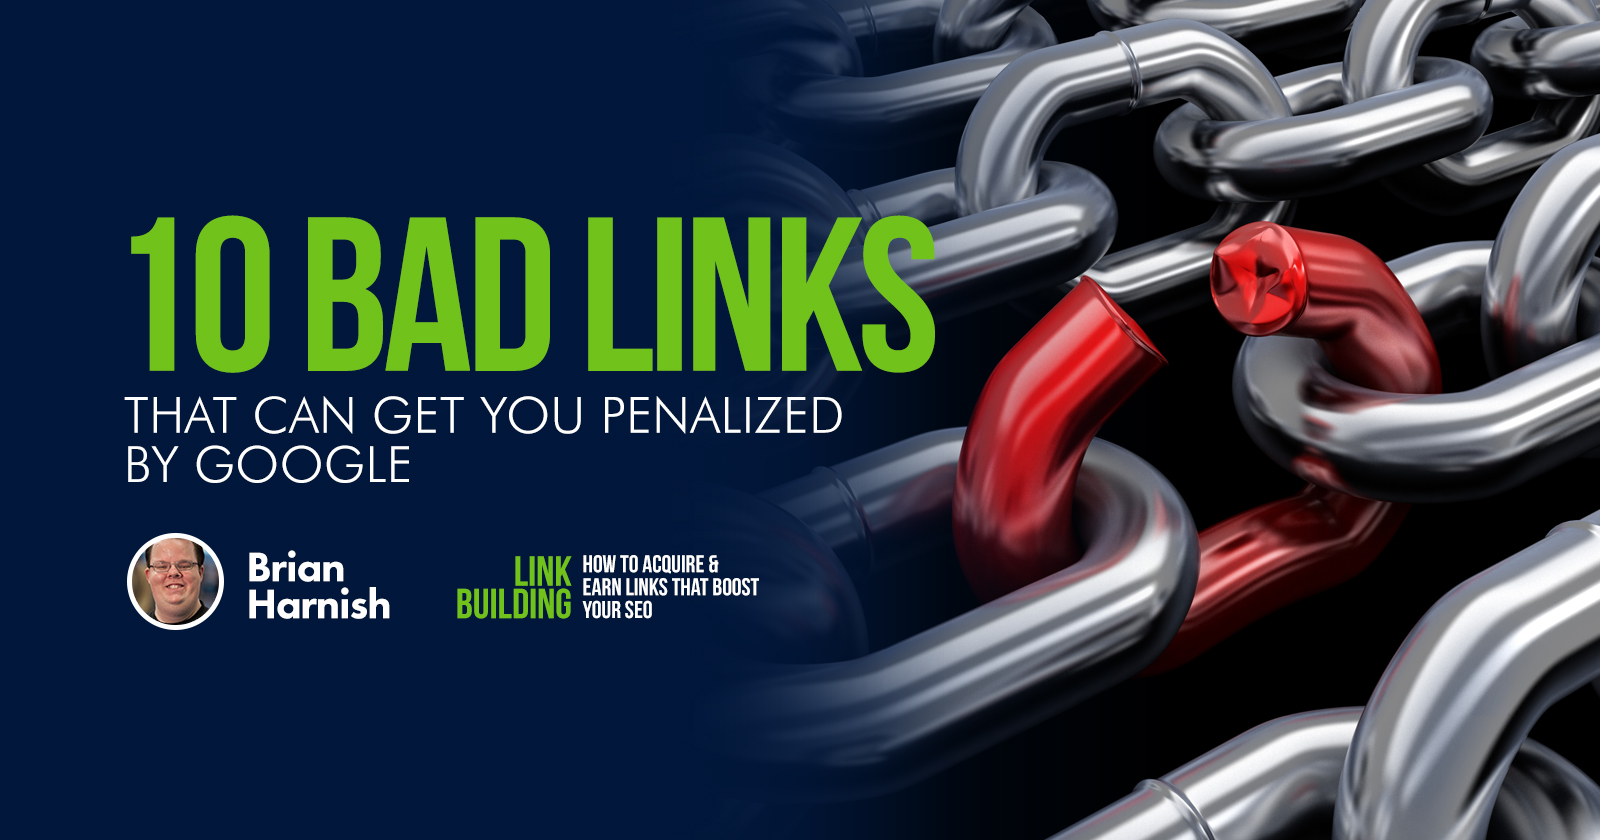 LB Guide - 10 Bad Links That Can Get You Penalized by Google - Brian Harnish